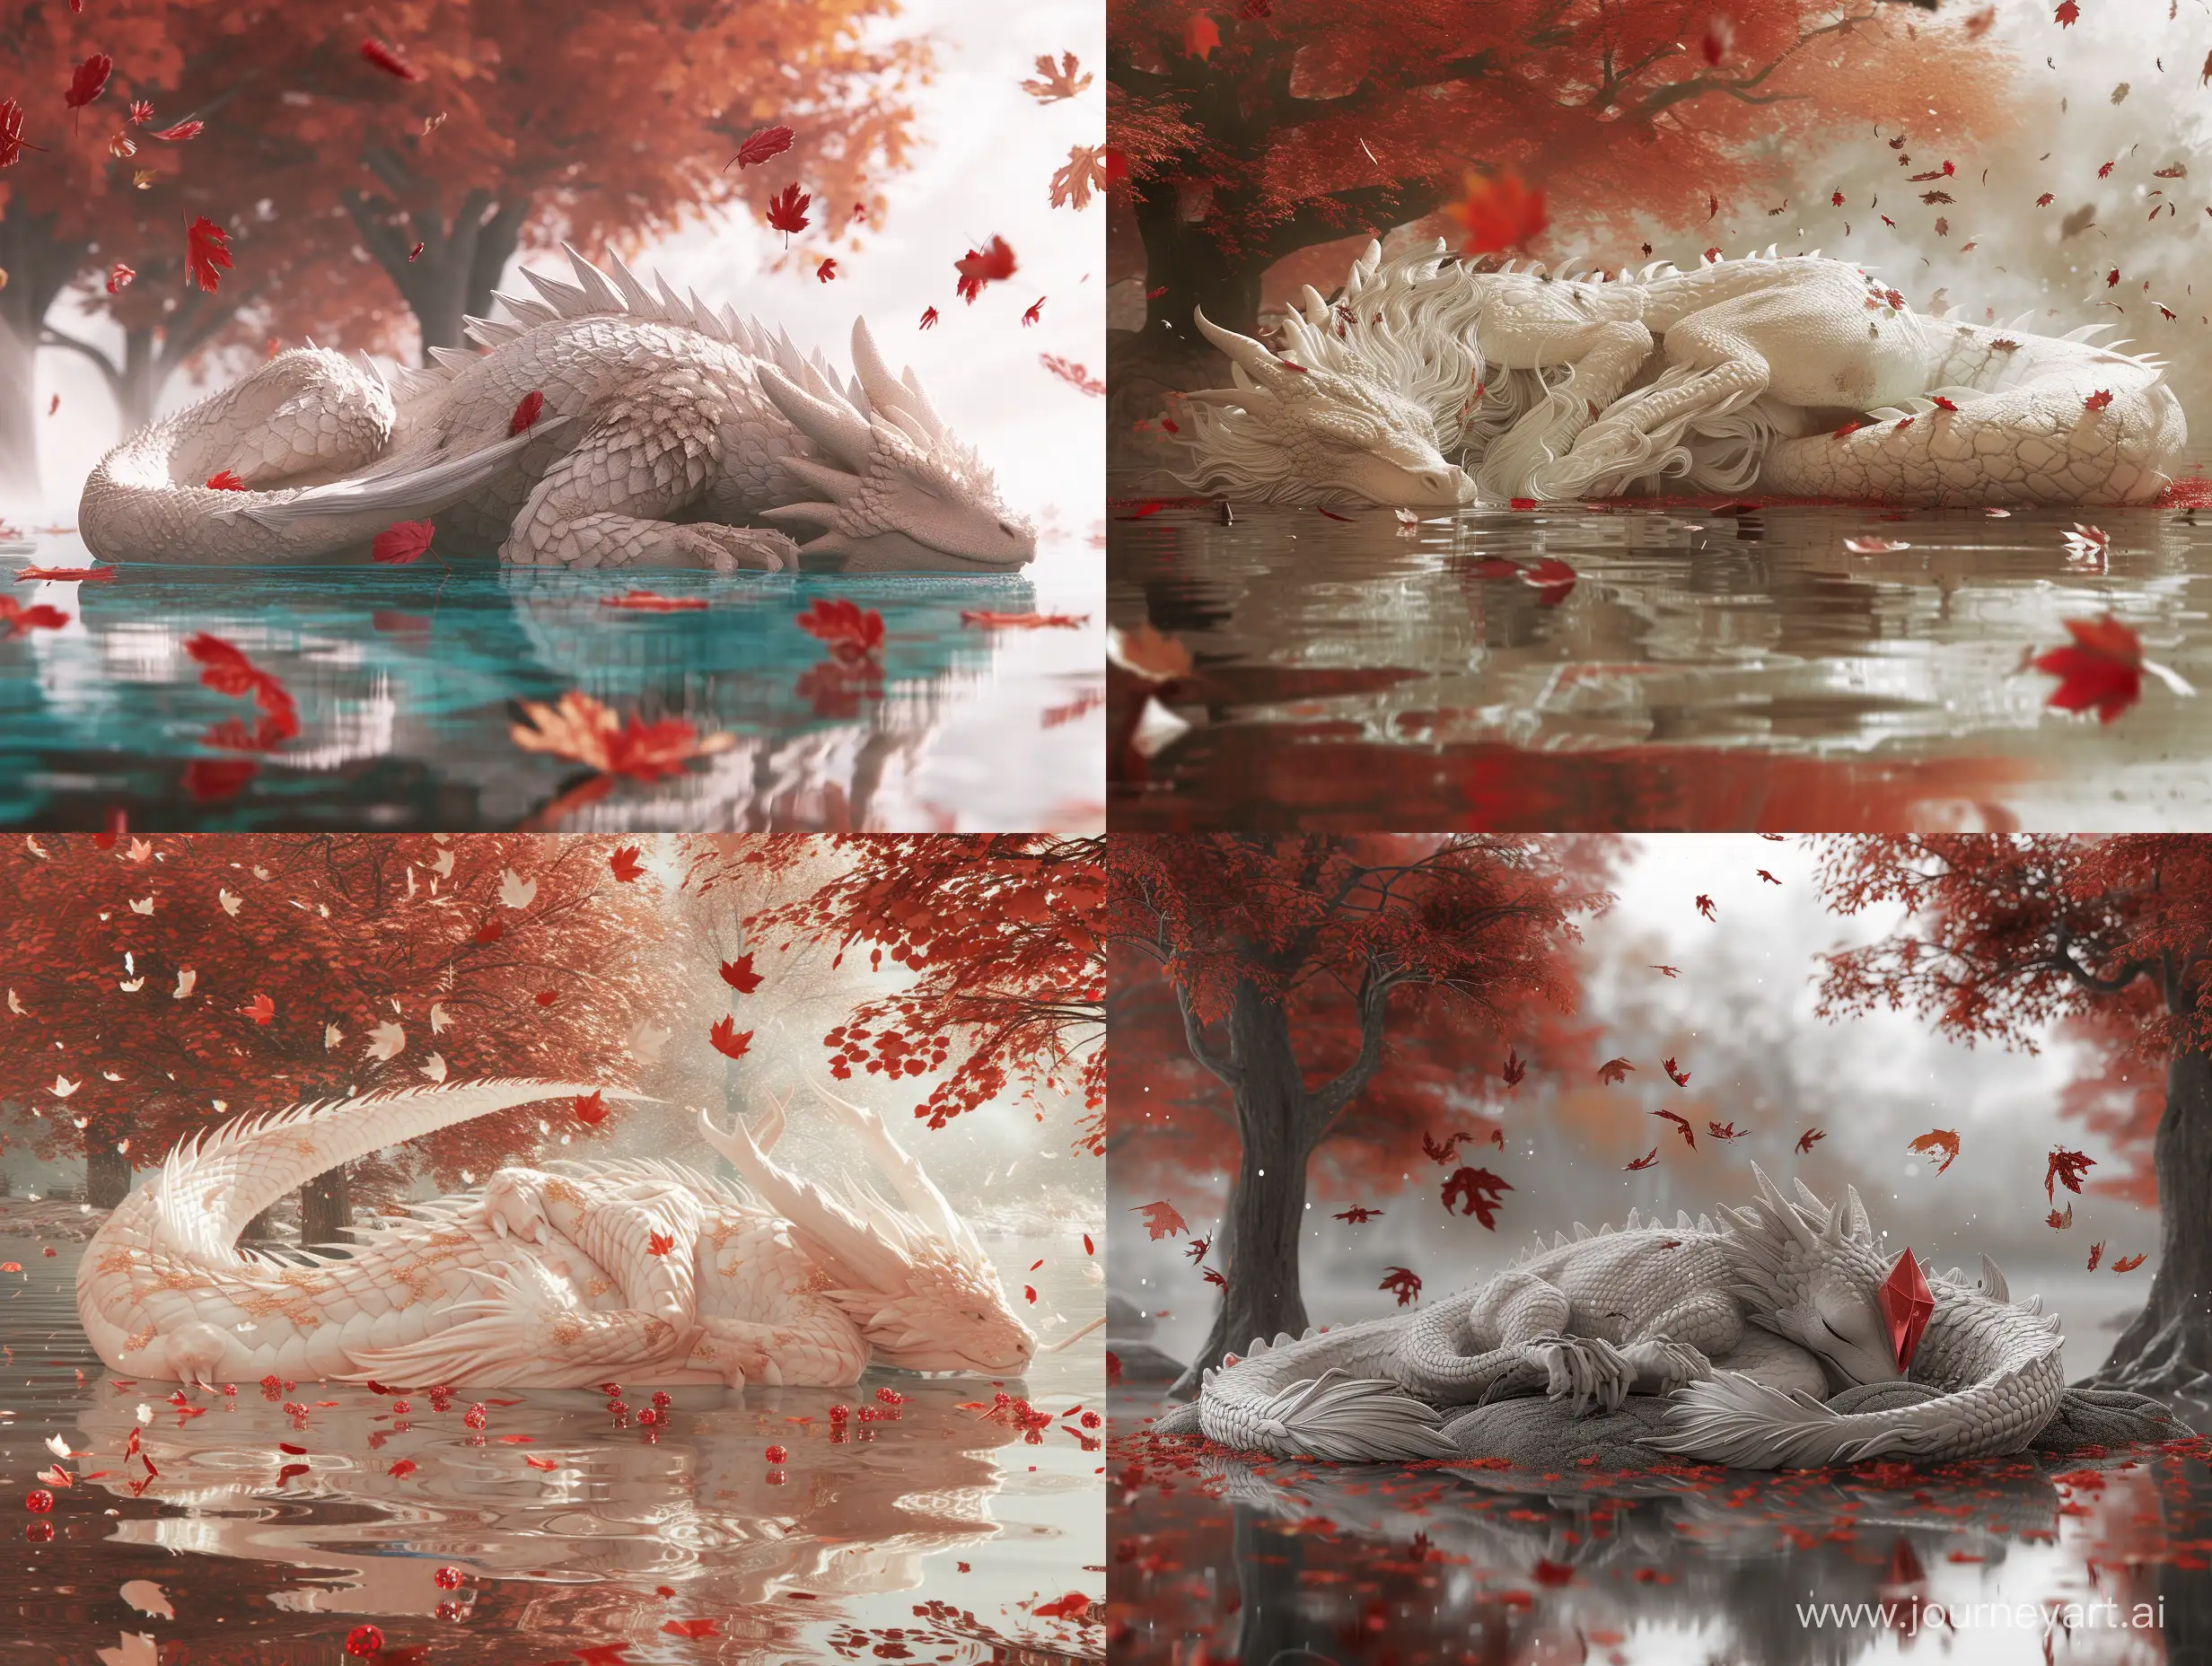 Dragon sleeping on sea, translucent glass, zbrush, ruby and gold style, anime aesthetics, furry art, Trees around the lake, English autumn, leaves falling on the lake surface, red and white, elaborate, c4d rendering, super high detail, 3d